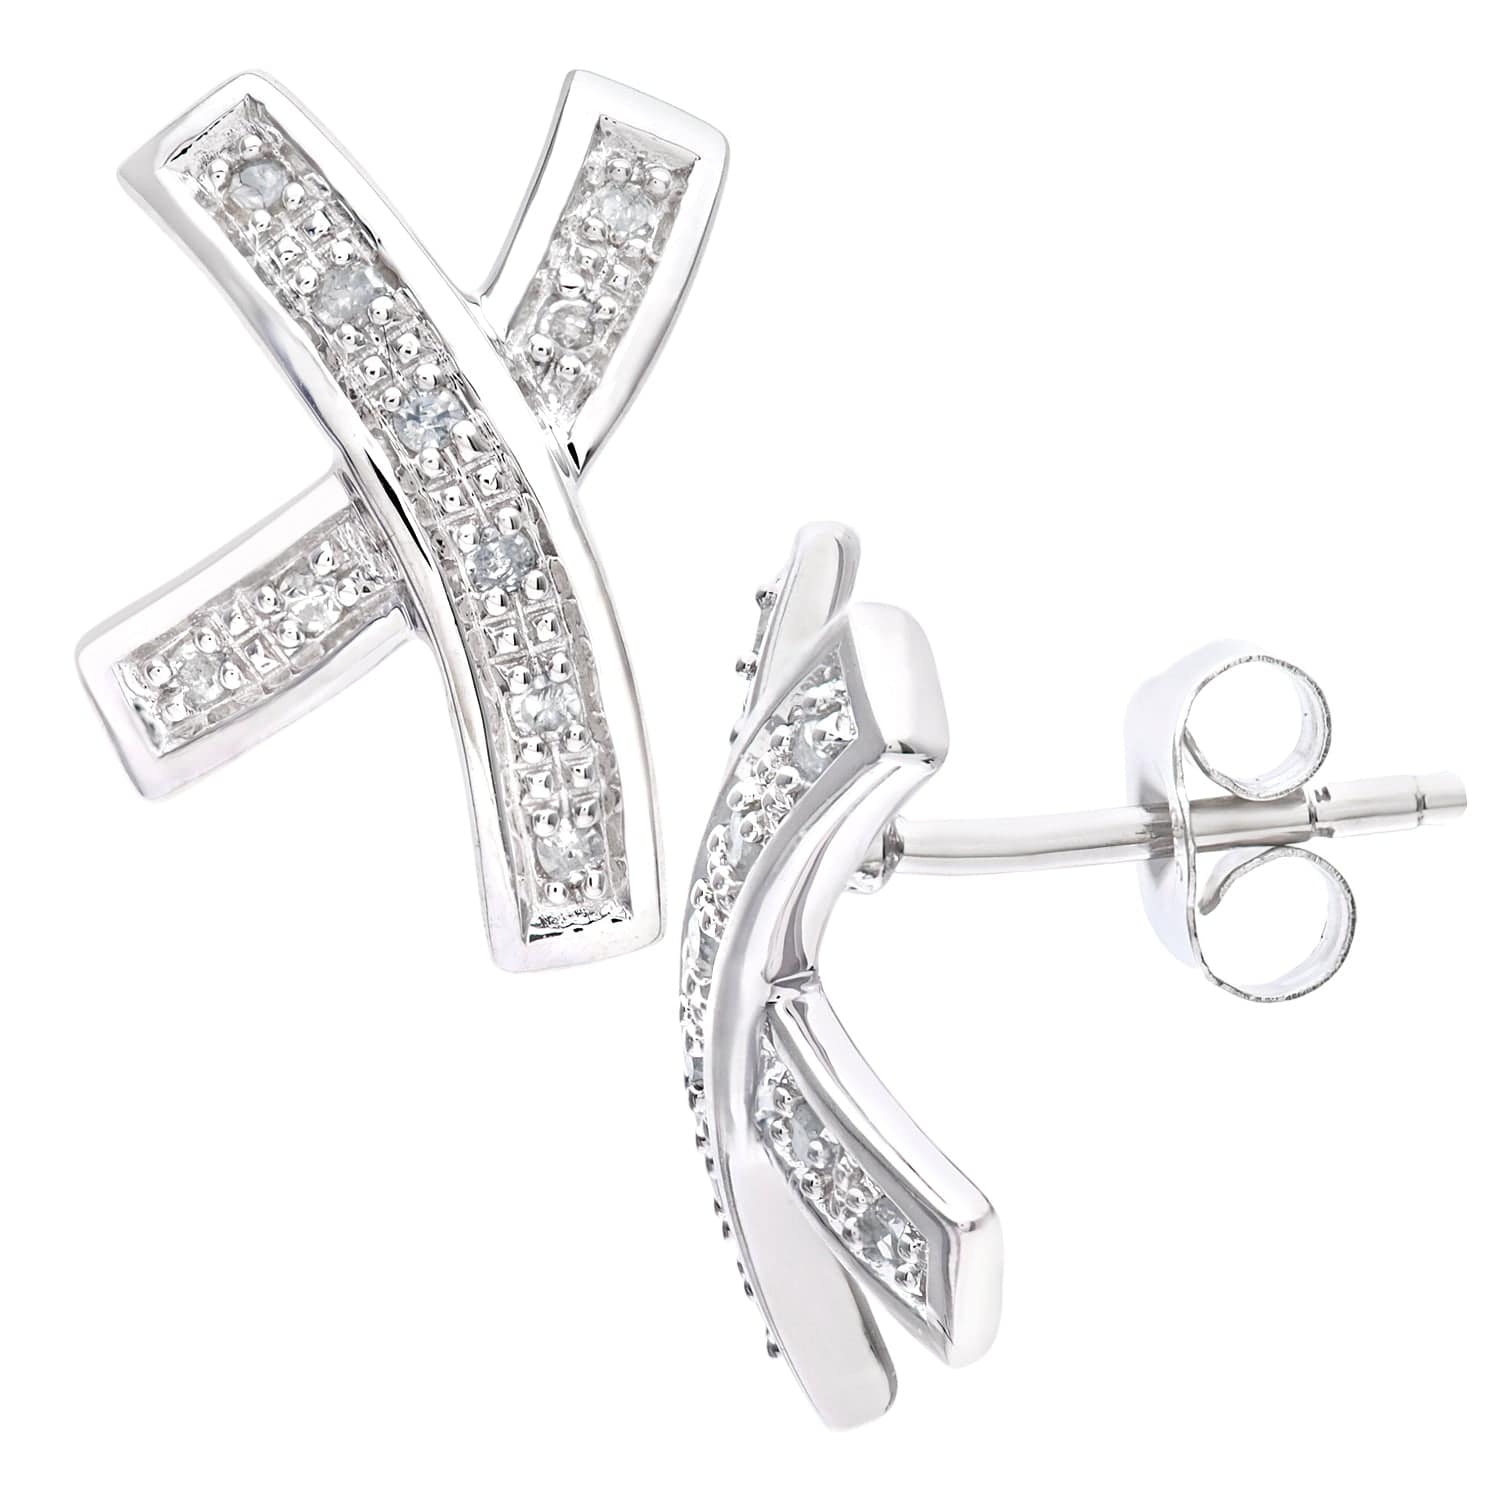 Lynora Luxe Earring White Gold 9ct / Diamond 9ct White Gold 0.10ct Diamond Stud Earrings